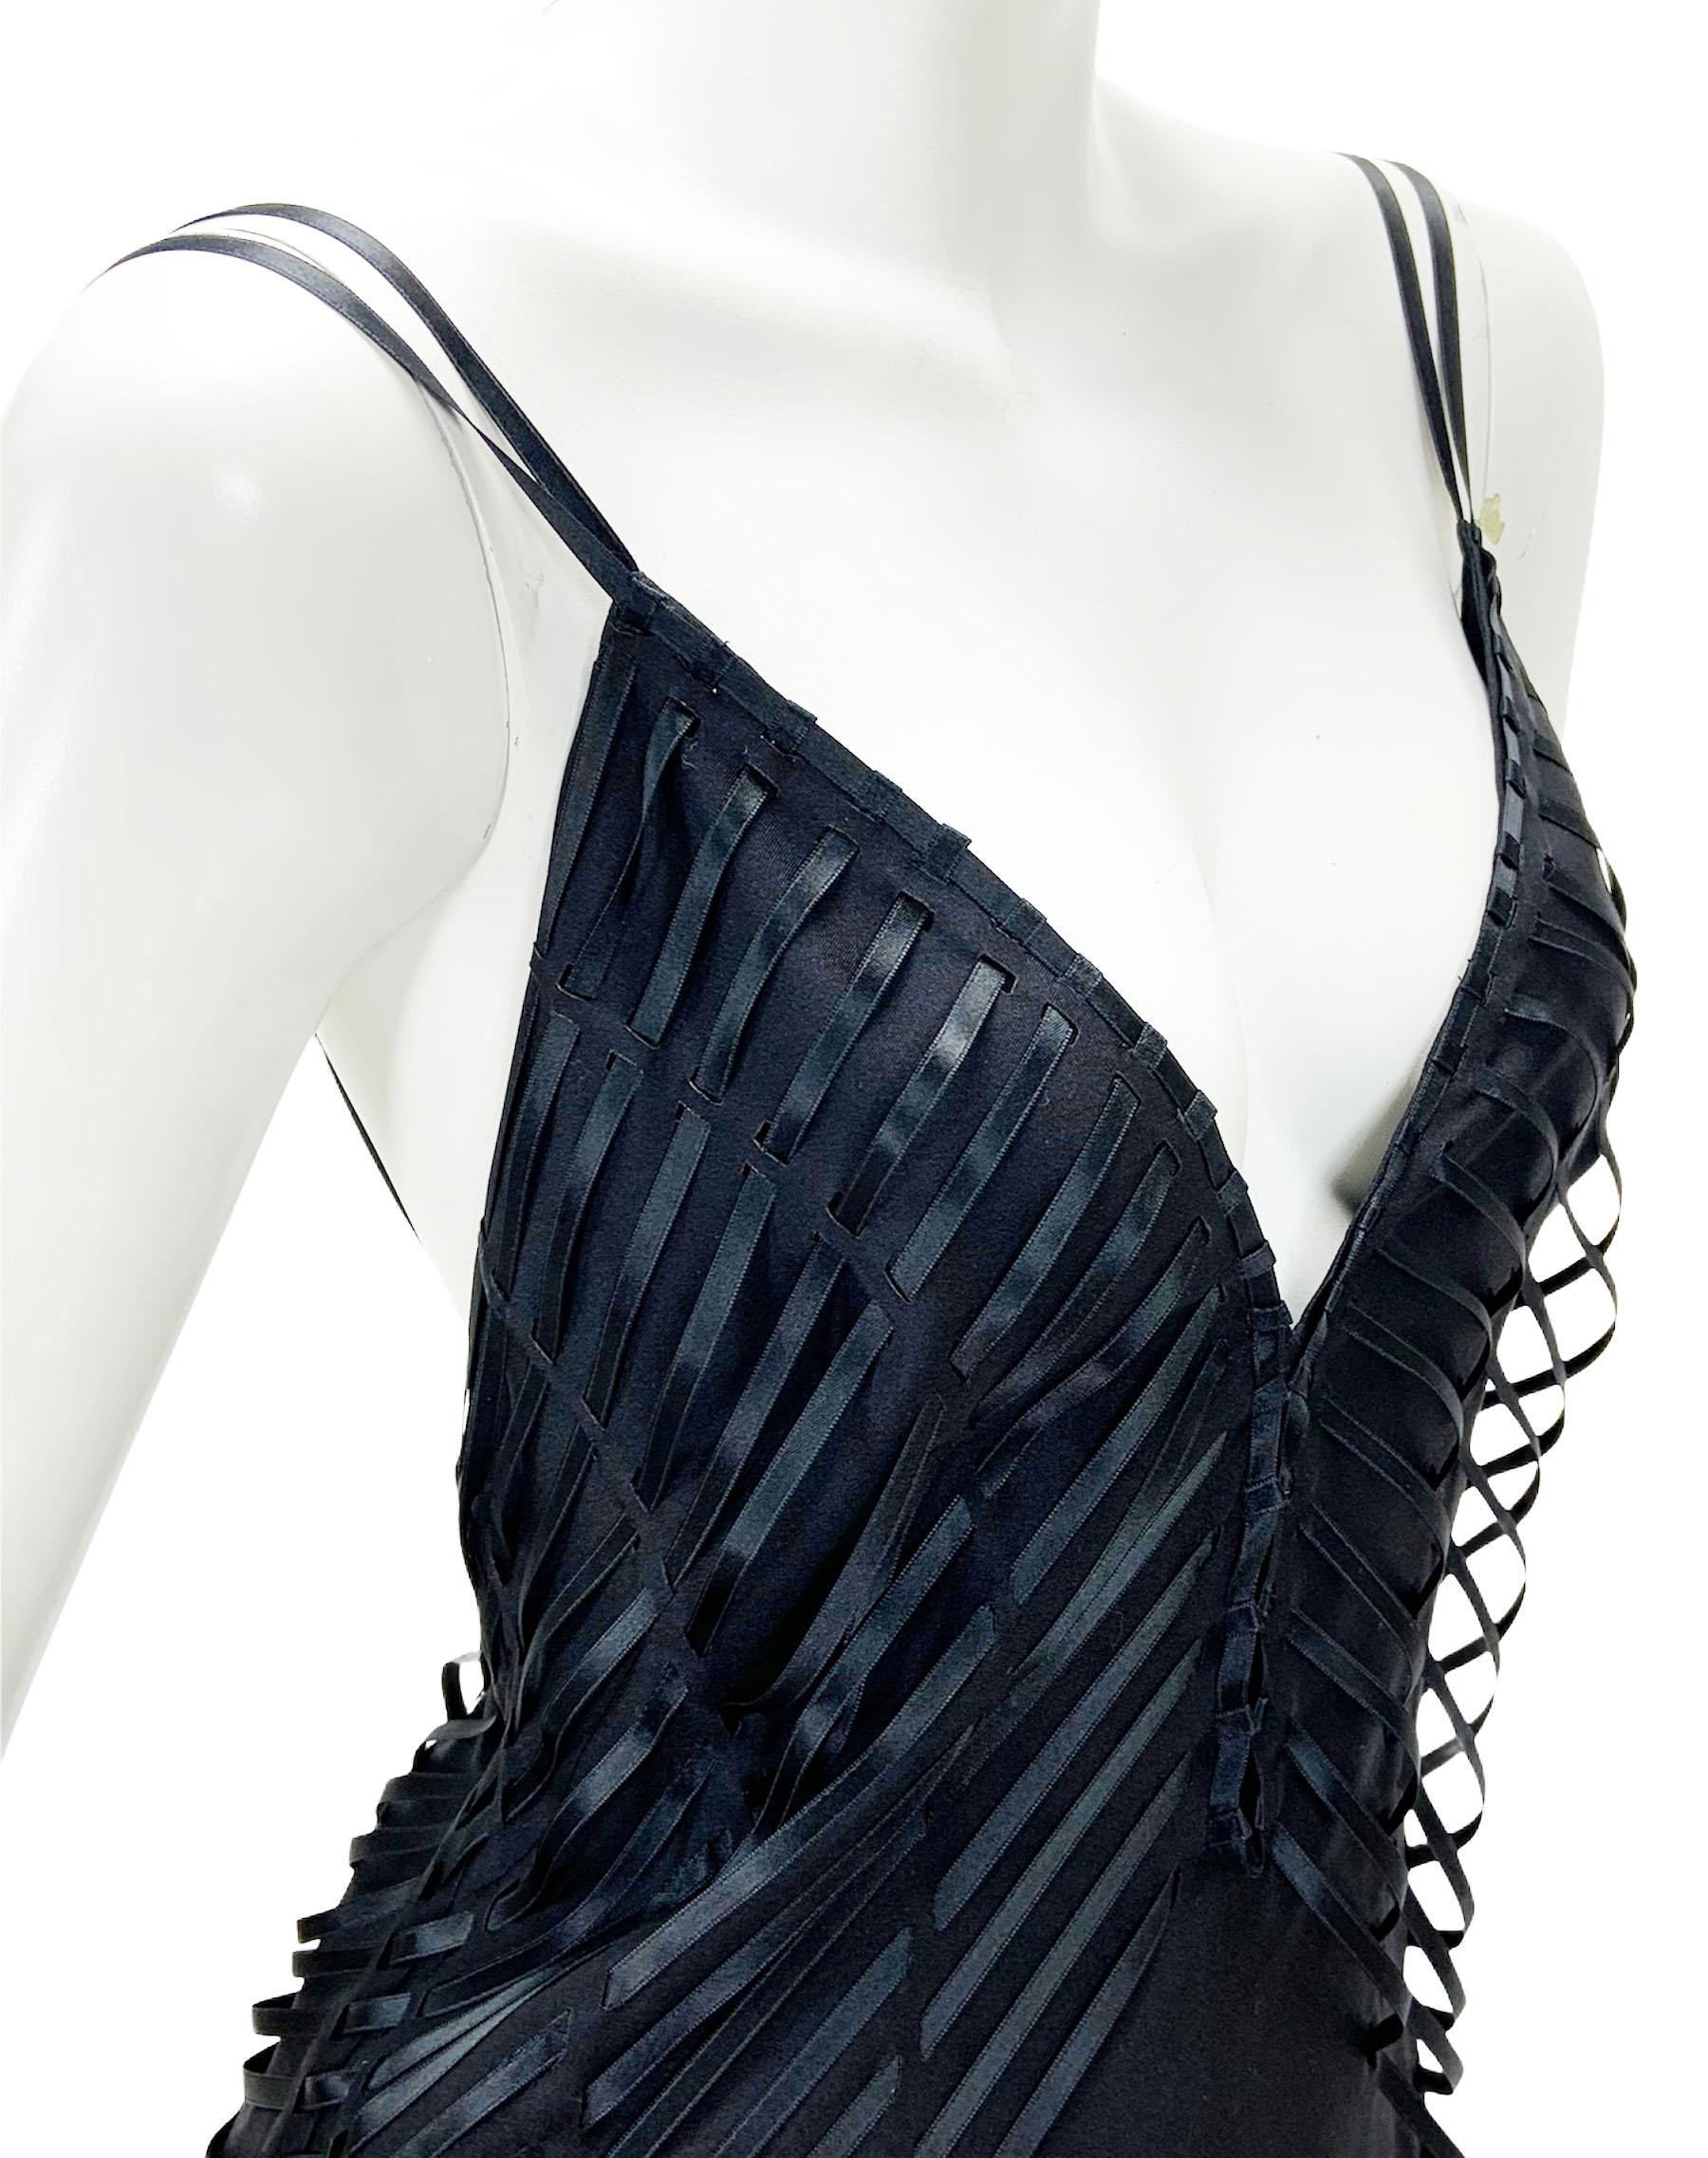 New Tom Ford for Gucci Black Silk Deep Plunging Dress Gown
2002 Gothic Collection
Designer size 44 - US 8
100% Silk, Deep Plunge, Open Back, Double Spaghetti Straps, Ribbon Applique, Fully Lined, Zip Closure.
Measurements: Length - 64 inches, Bust -